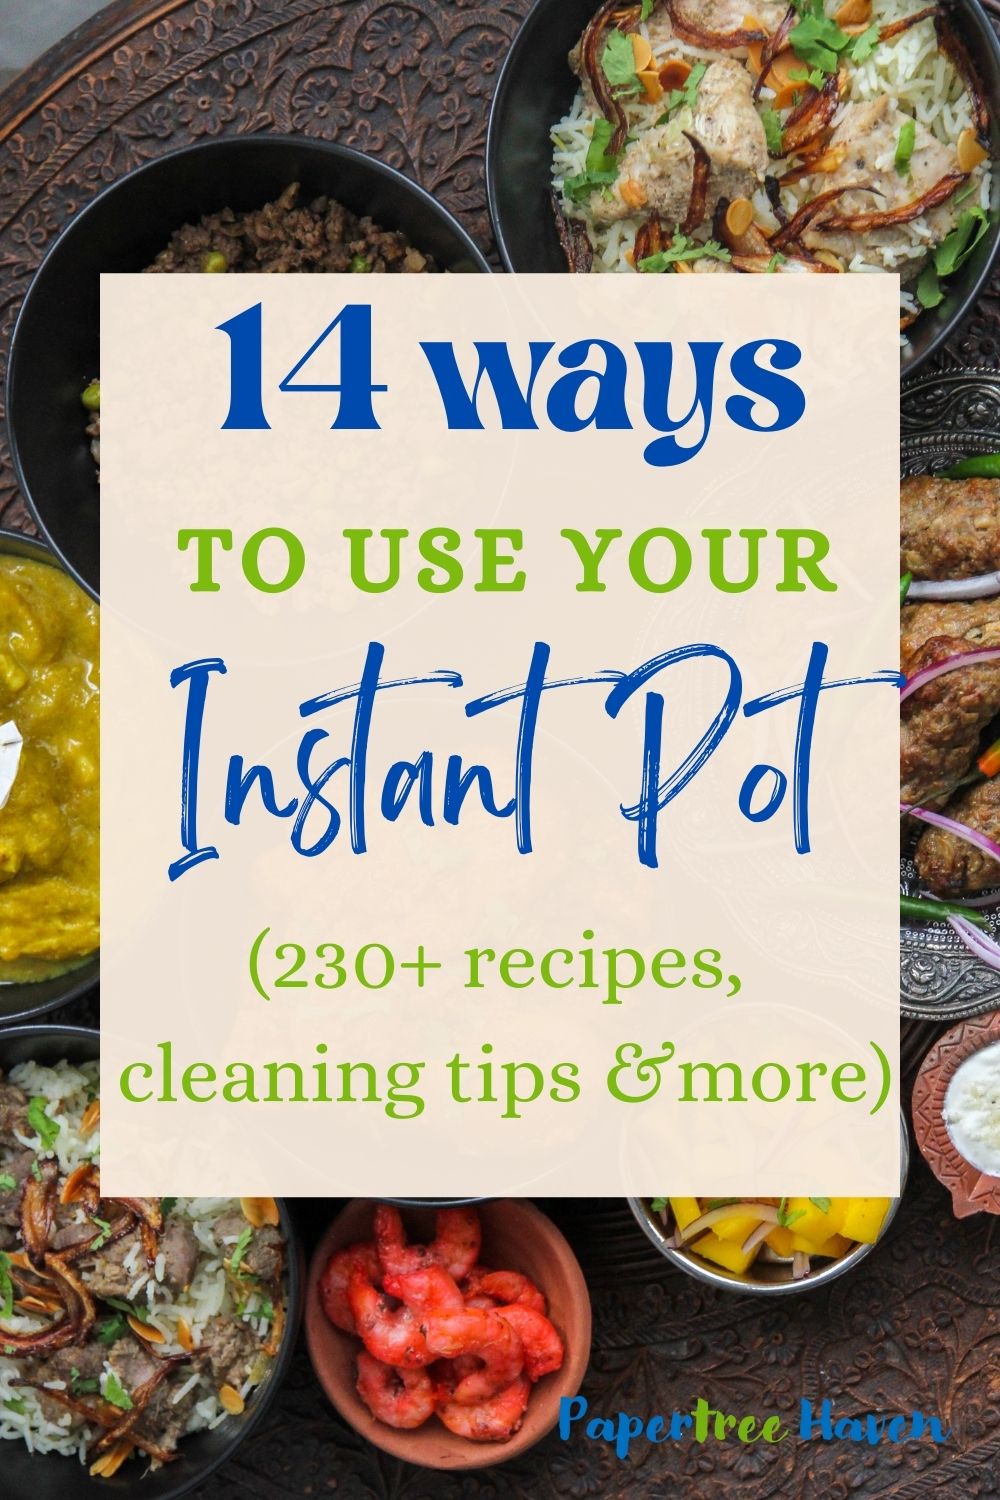 14 ways to use Instant pot